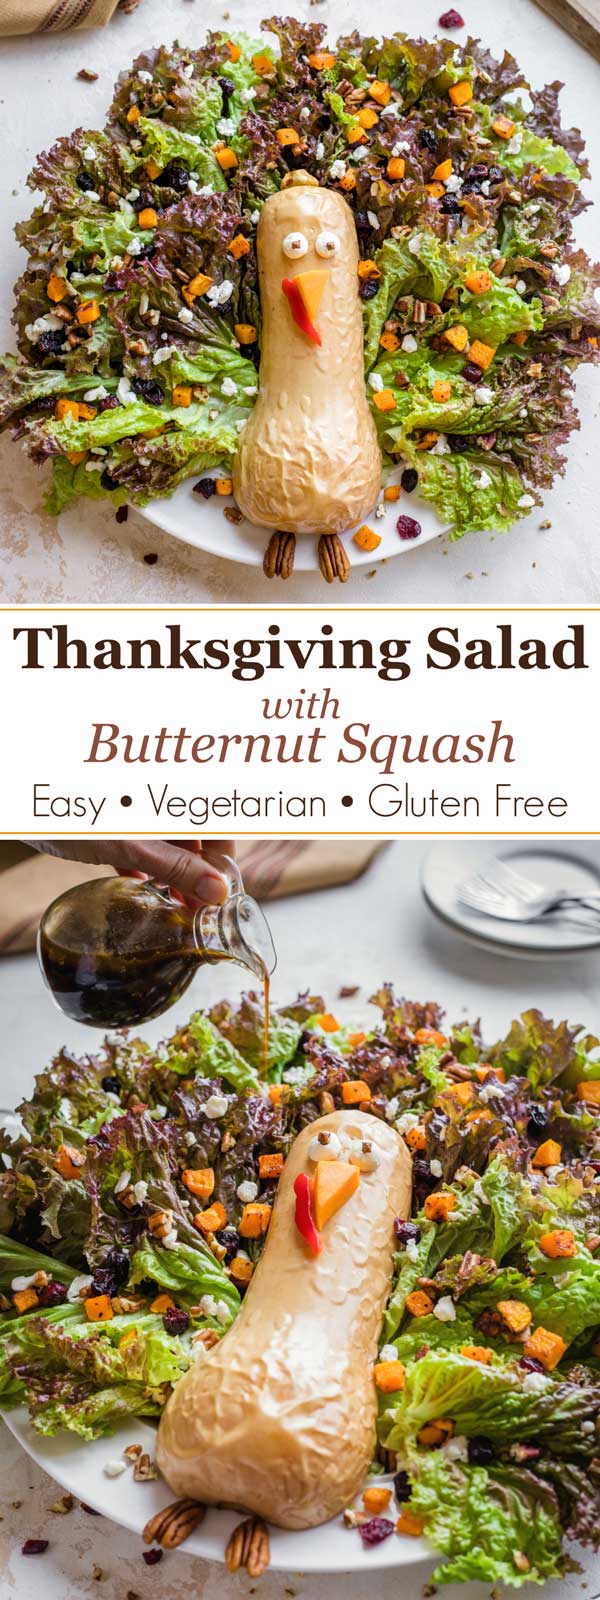 collage of two salad photos with text overlay "Thanksgiving Salad with Butternut Squash (Easy, Vegetarian, Gluten Free)